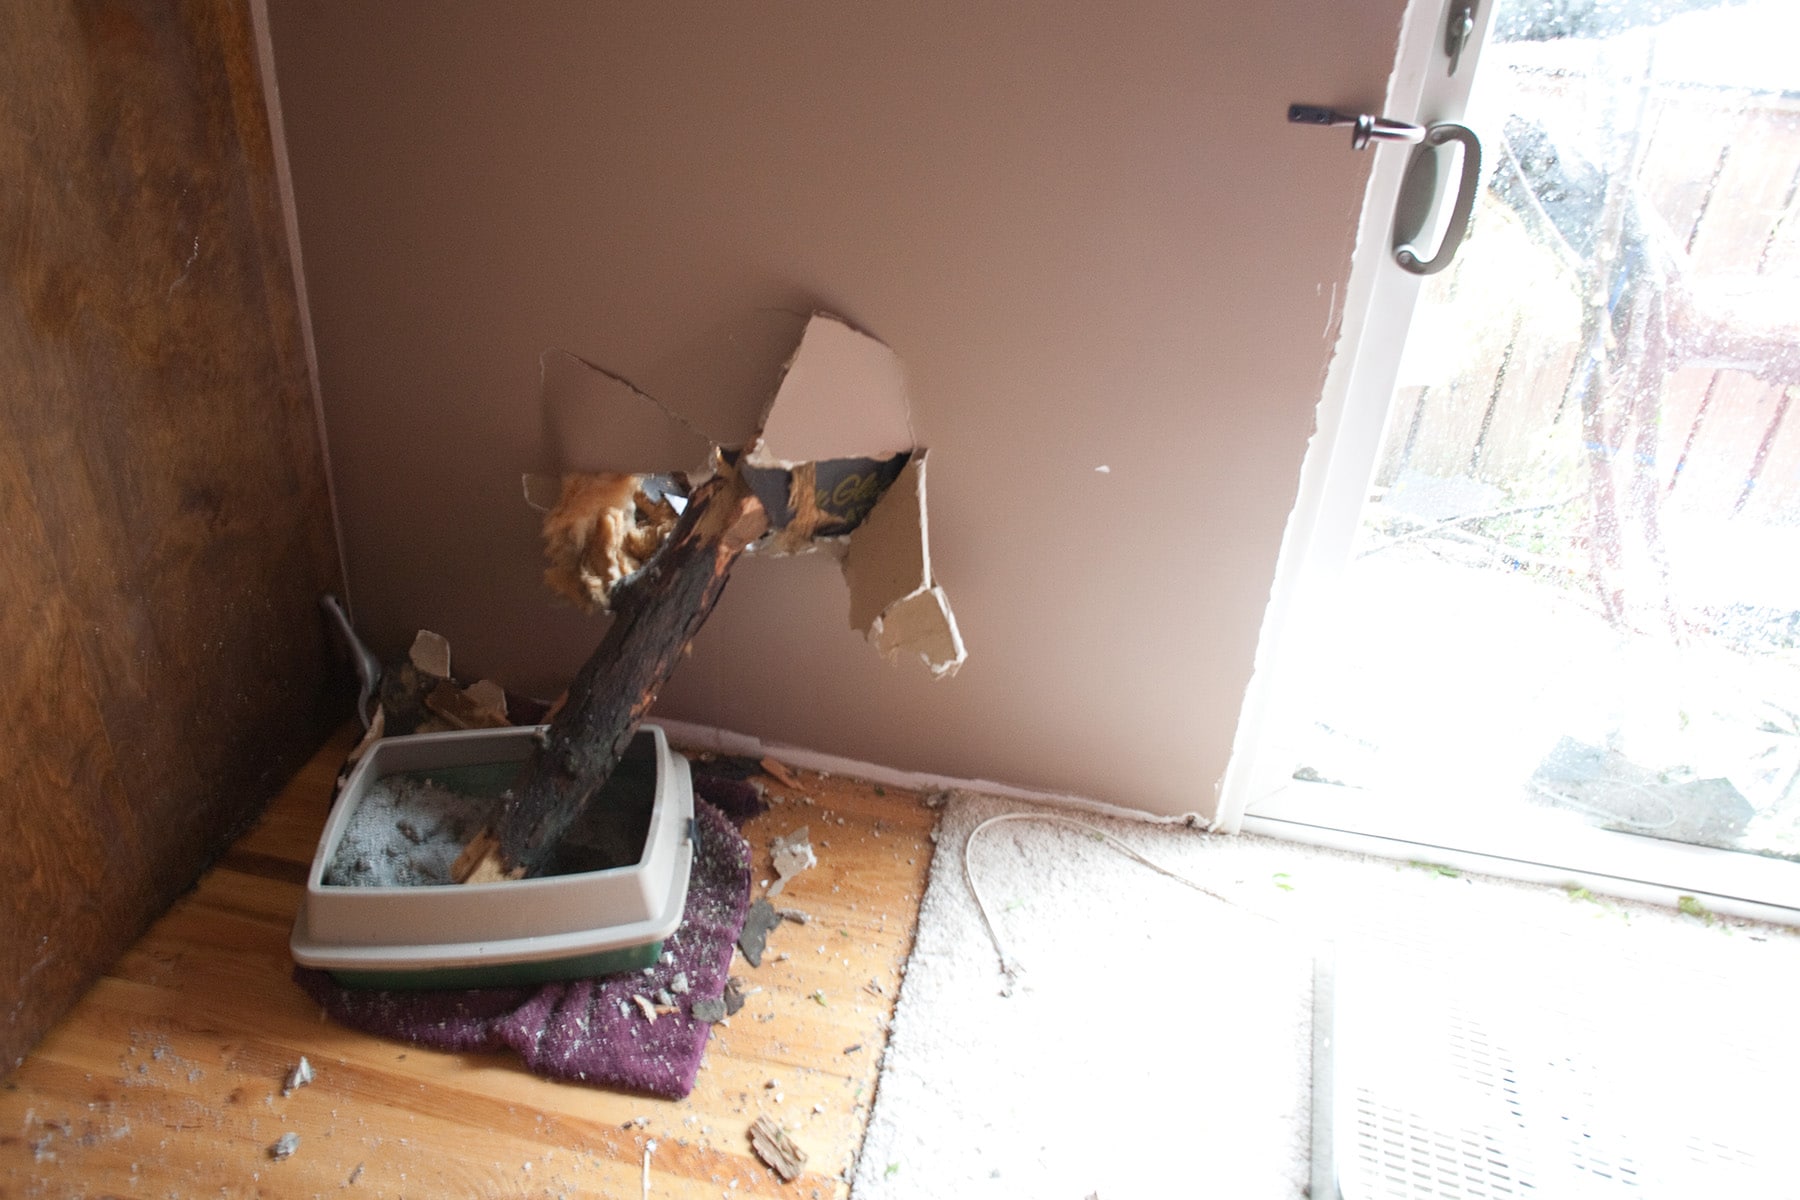 Interior shot of the house, showing the thick branch of tree that had pierced the wall and landed in the cat litter.